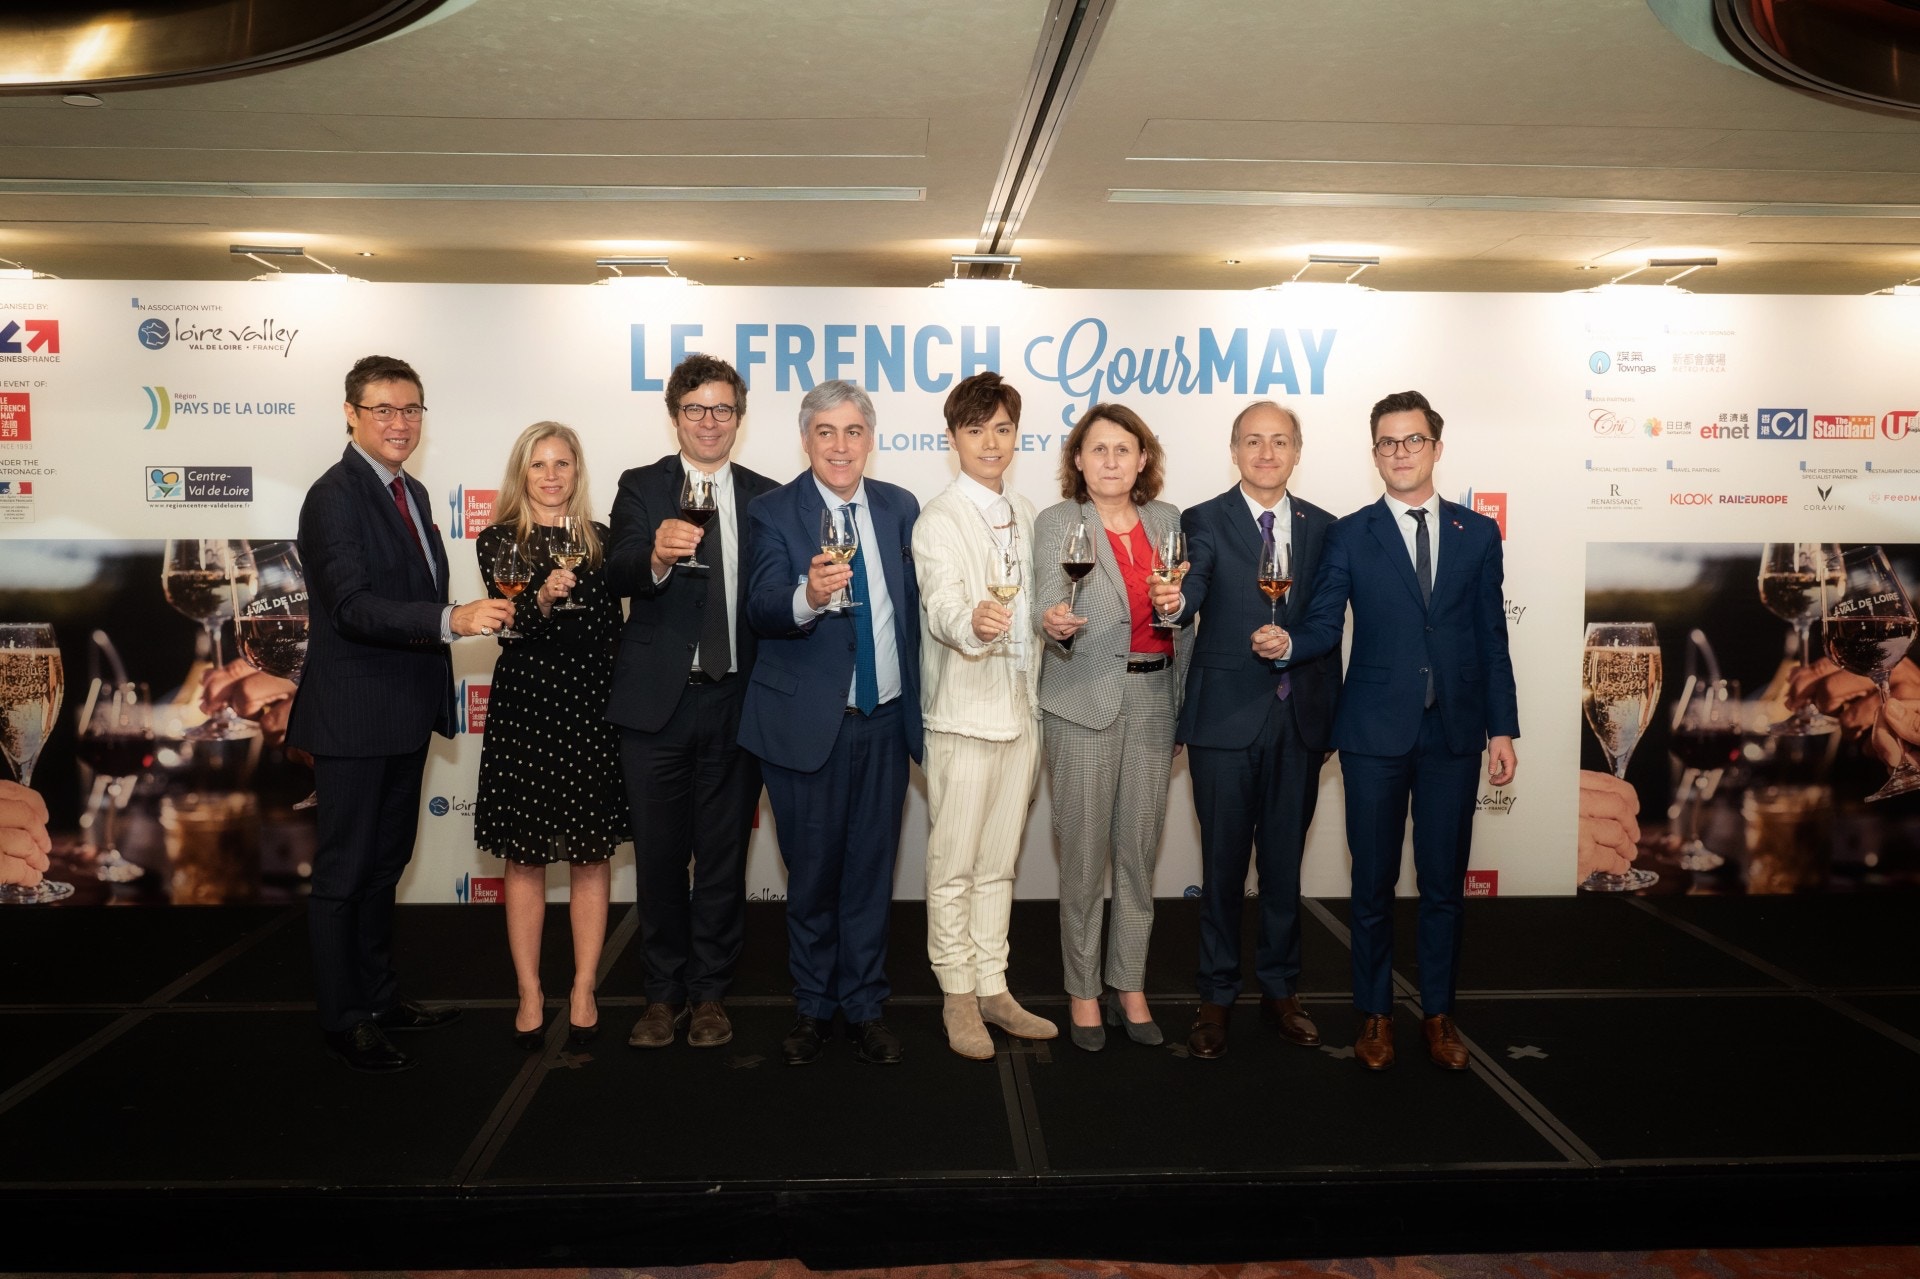 (From Left to Right) Dr. Andrew Yuen, President of the Board of Le French May 法國五月 法國五月董事會主席阮偉文先生；Ms. Mélanie Gaudin, Director of 法國商務投資署 Business France - French Trade Commission in Hong